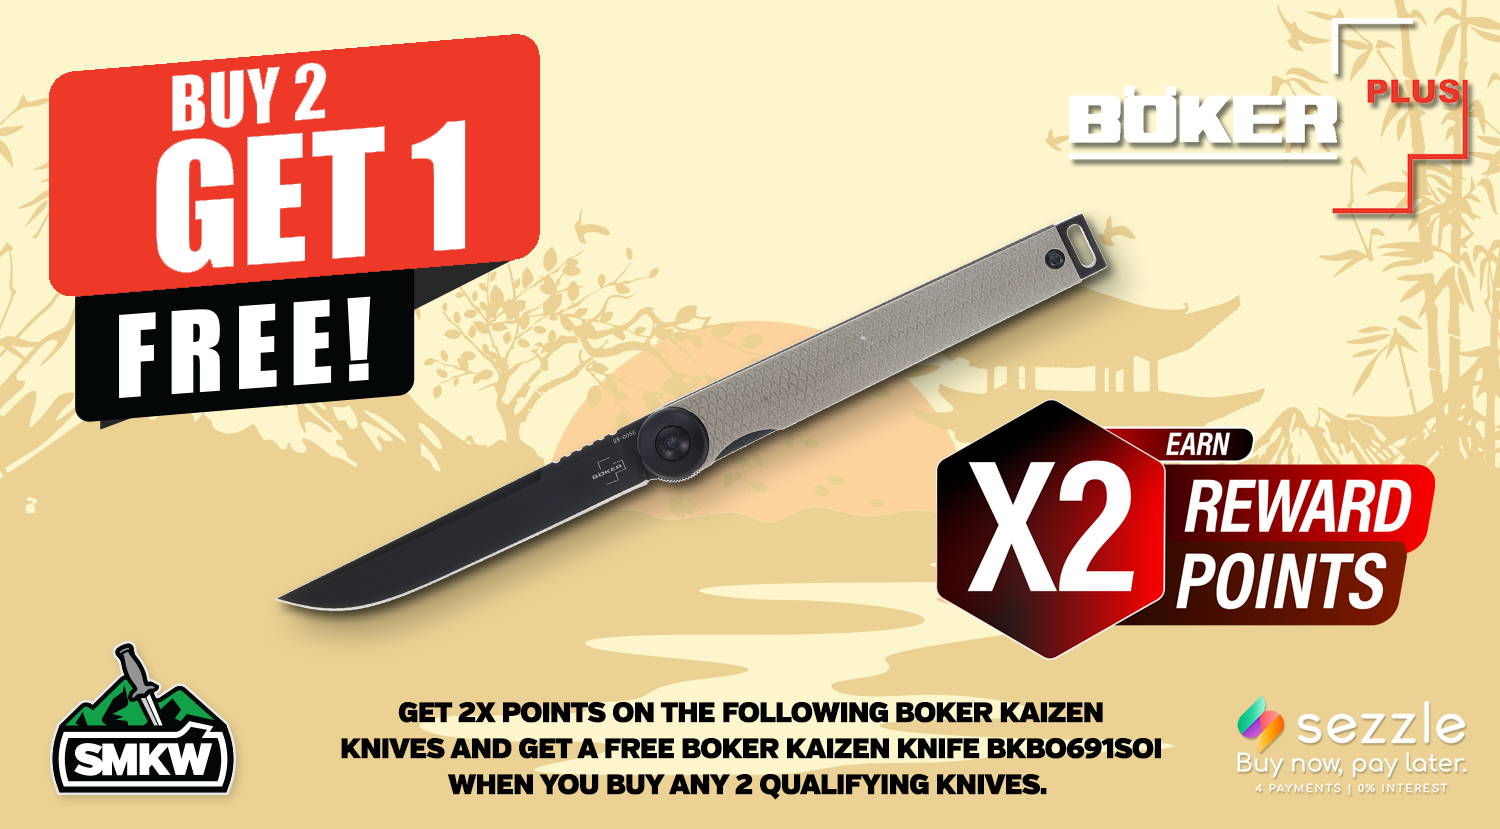 Buy 2 get 1 on select Boker Kaizen and Double rewards Points